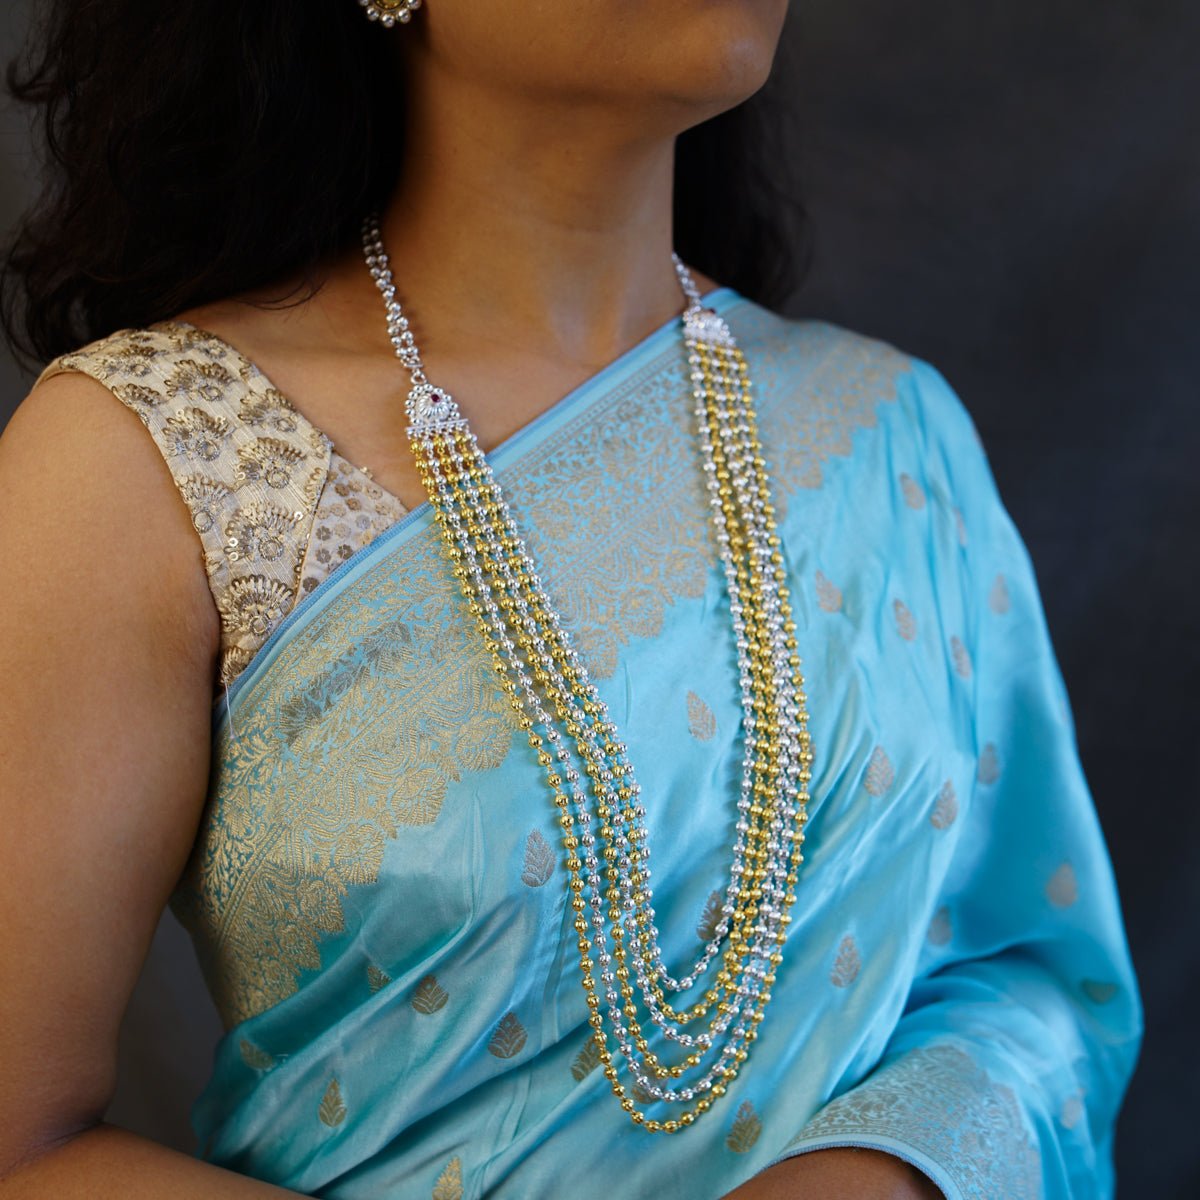 a woman wearing a blue sari and a necklace